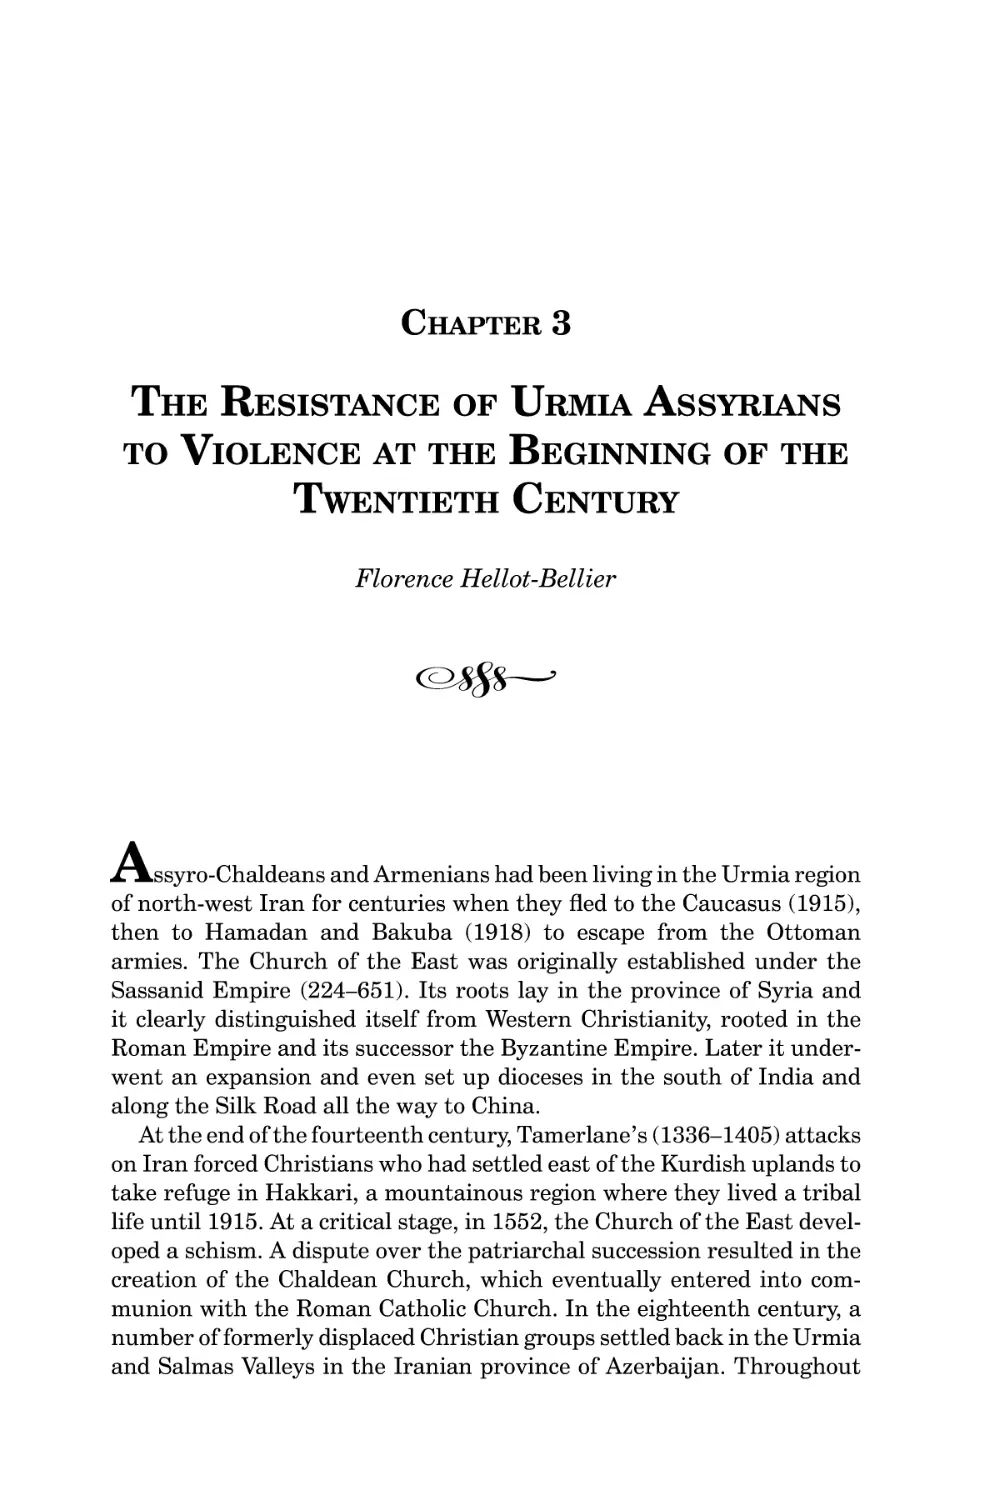 Chapter 3 The Resistance of Urmia Assyrians to Violence at the Beginning of the Twentieth Century